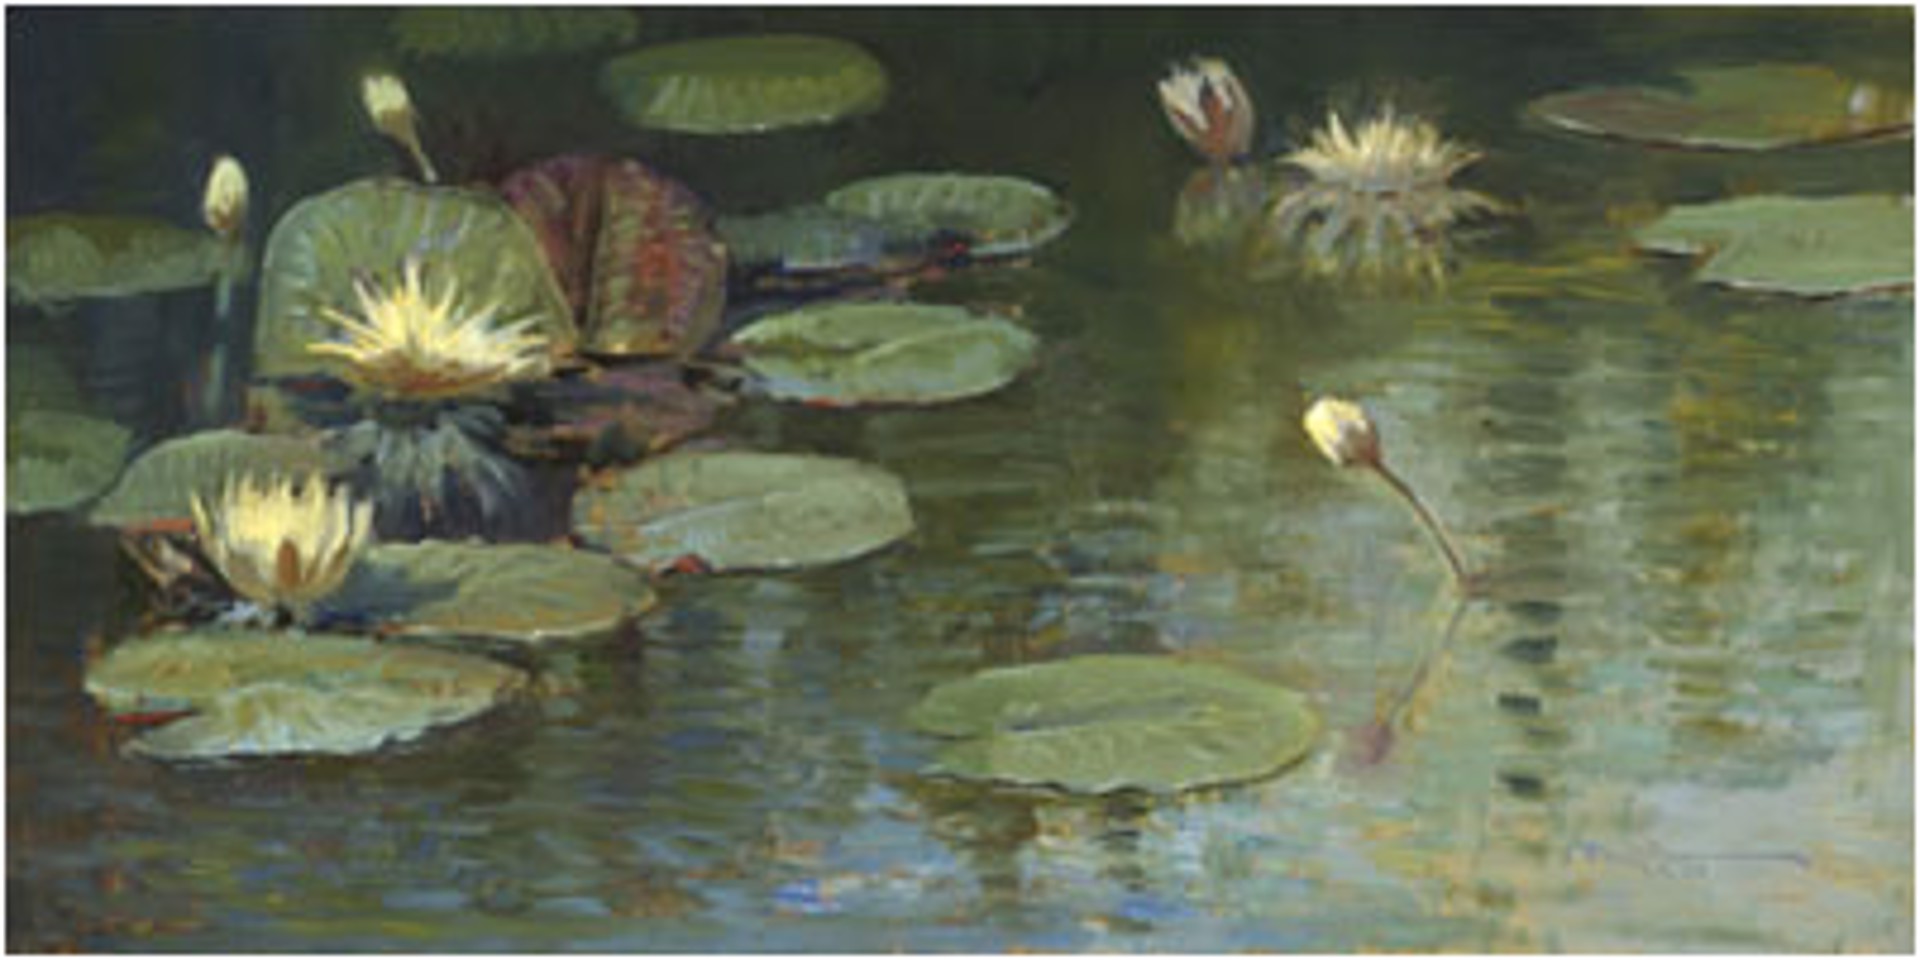 In The Company Of Lilies by John Carroll Doyle